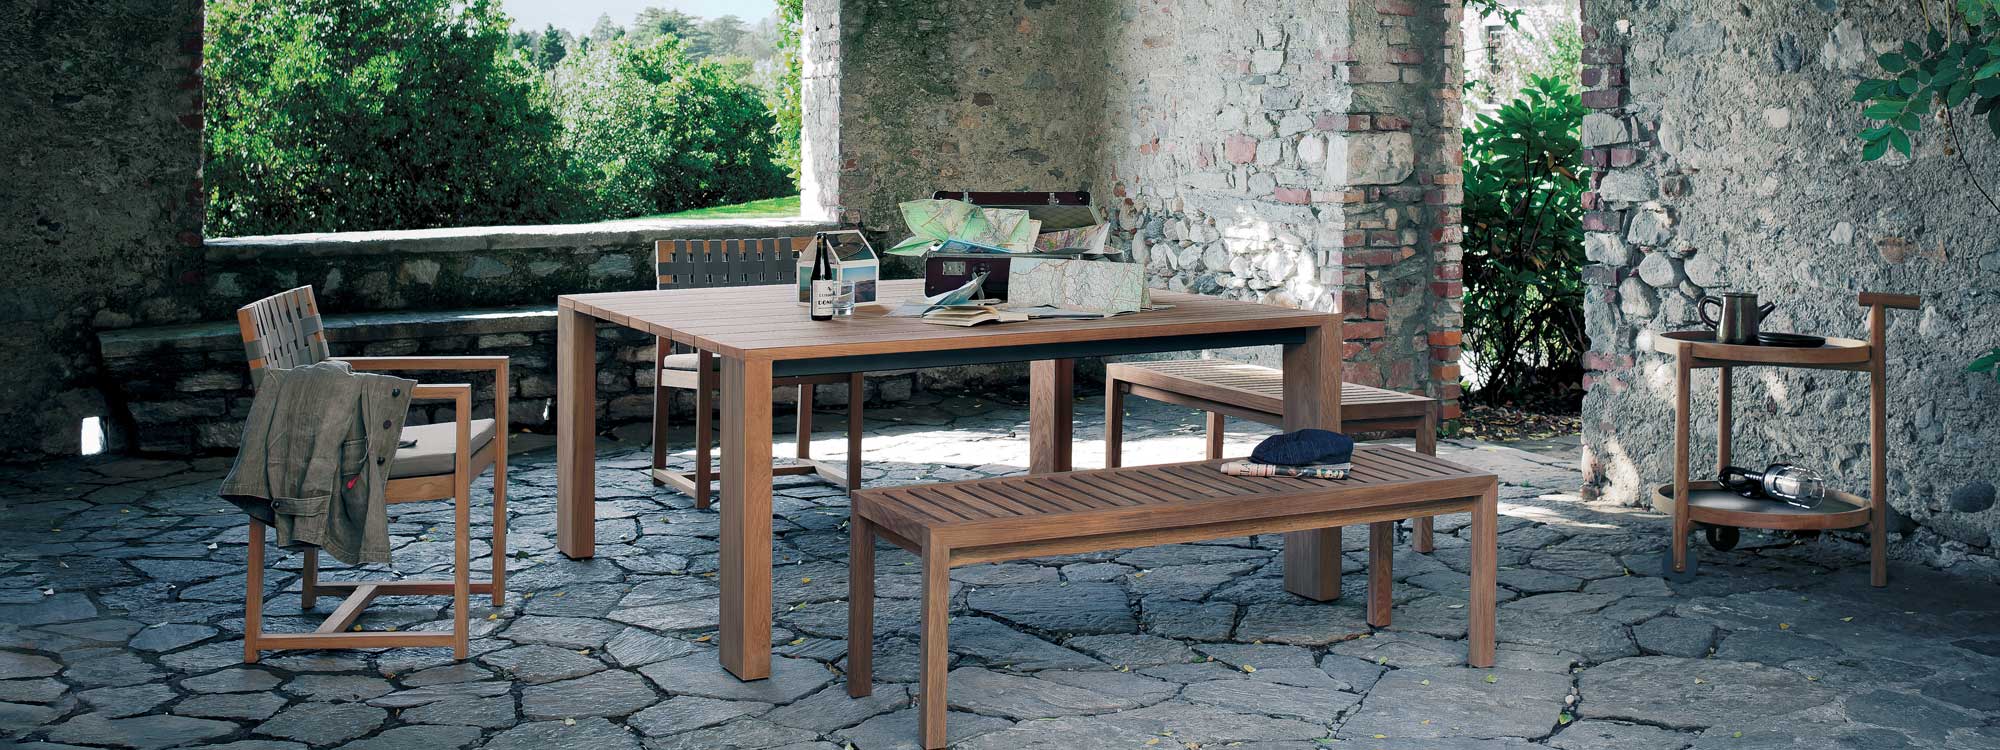 Pier teak table and bench with Network teak chairs in rustic Italian garden room.